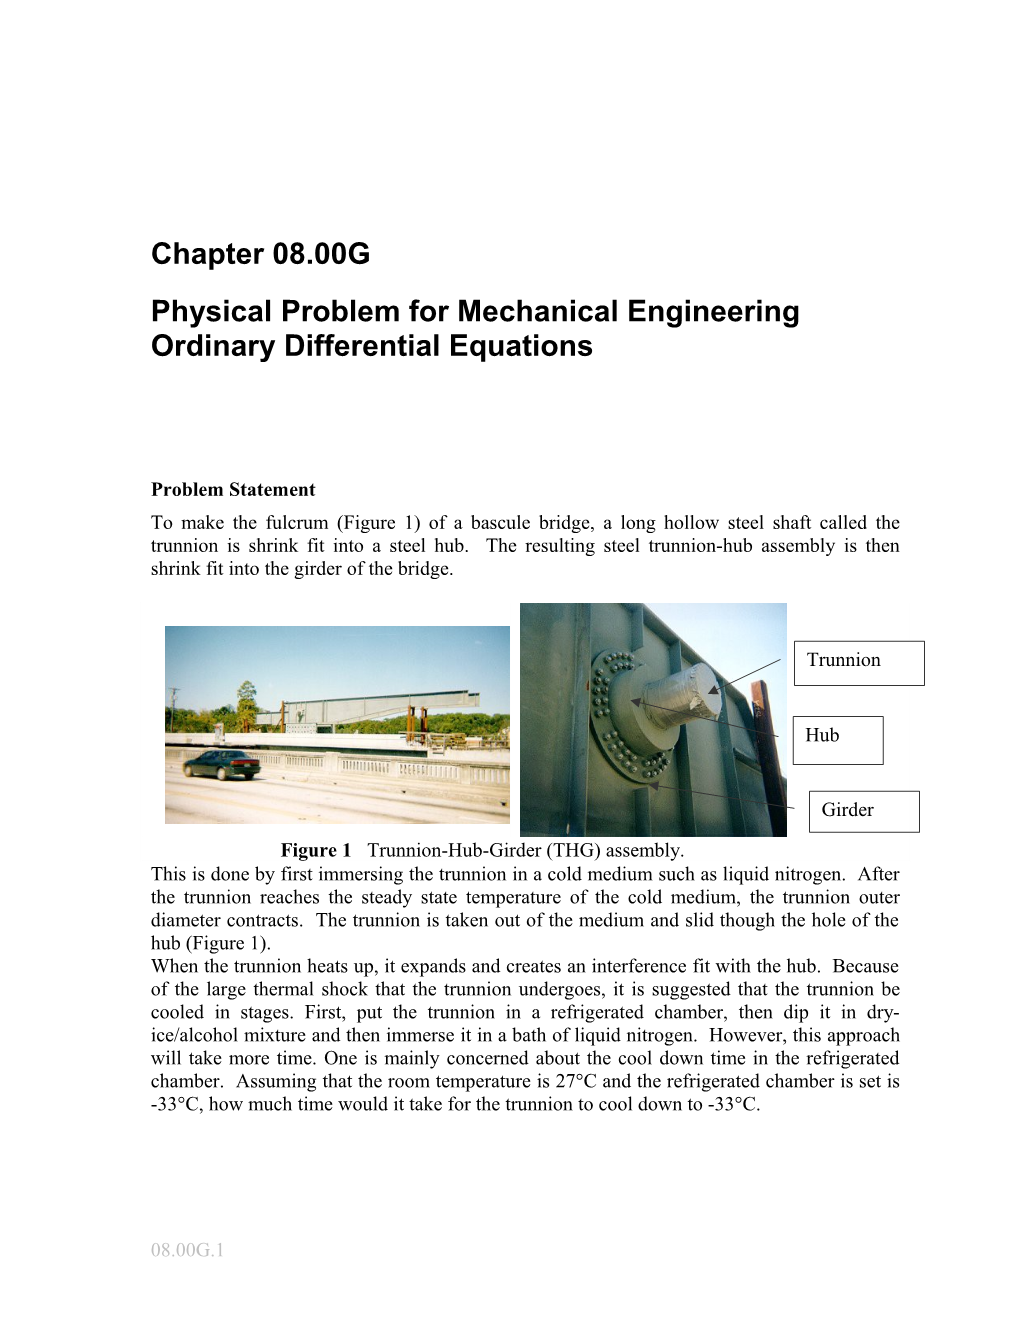 Ordinary Differential Equations-Physical Problem-Mechanical Engineering